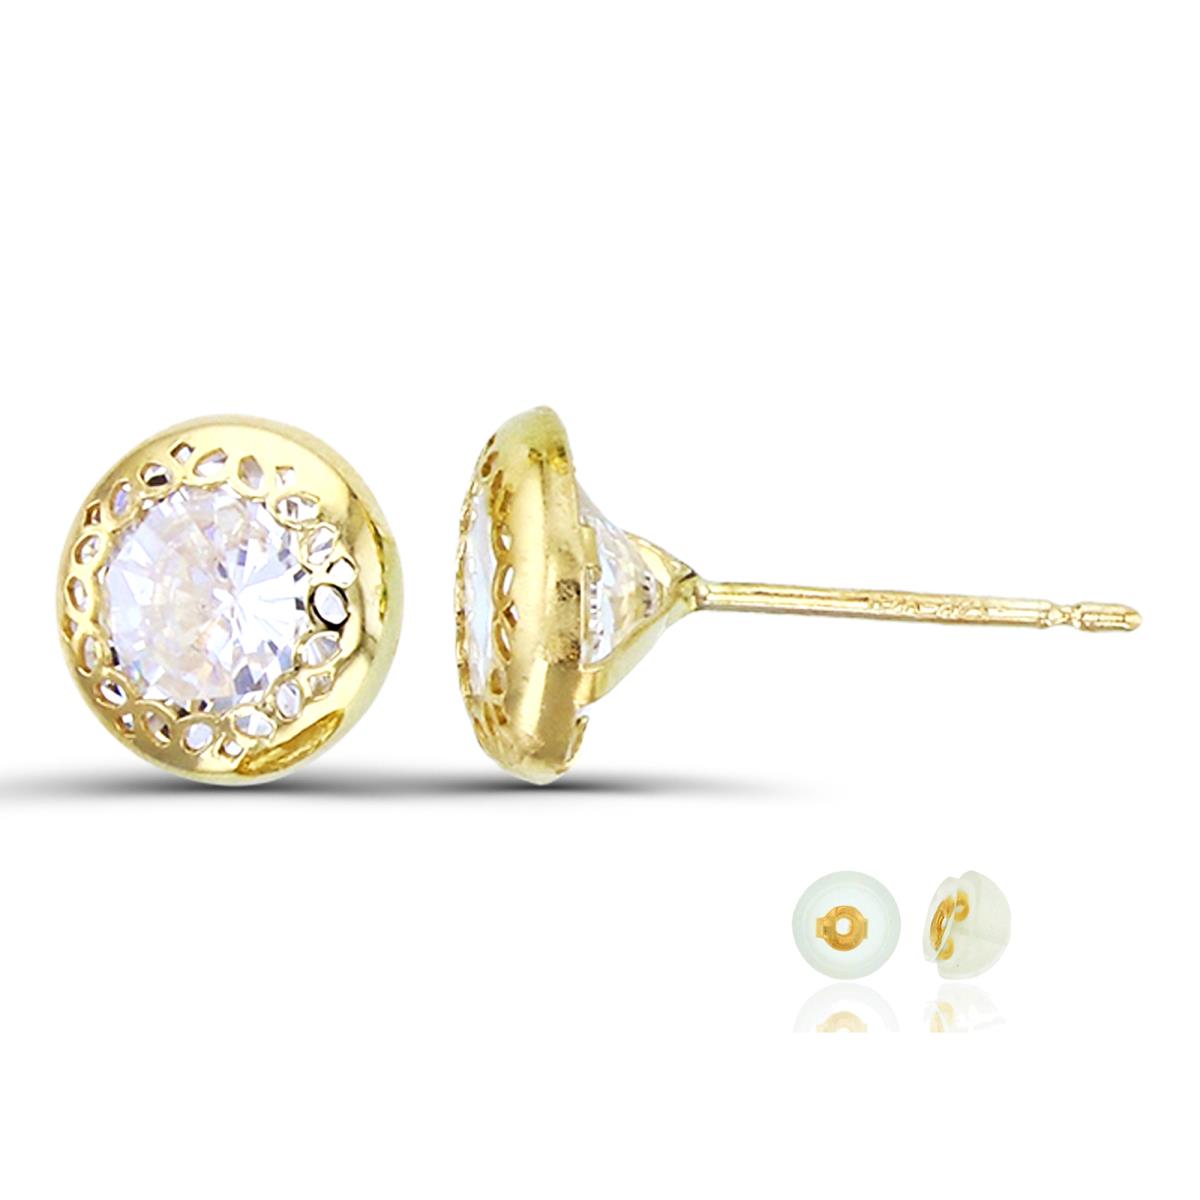 10K Yellow Gold 6mm Round Textured Bezel Stud Earring with Silicone Back